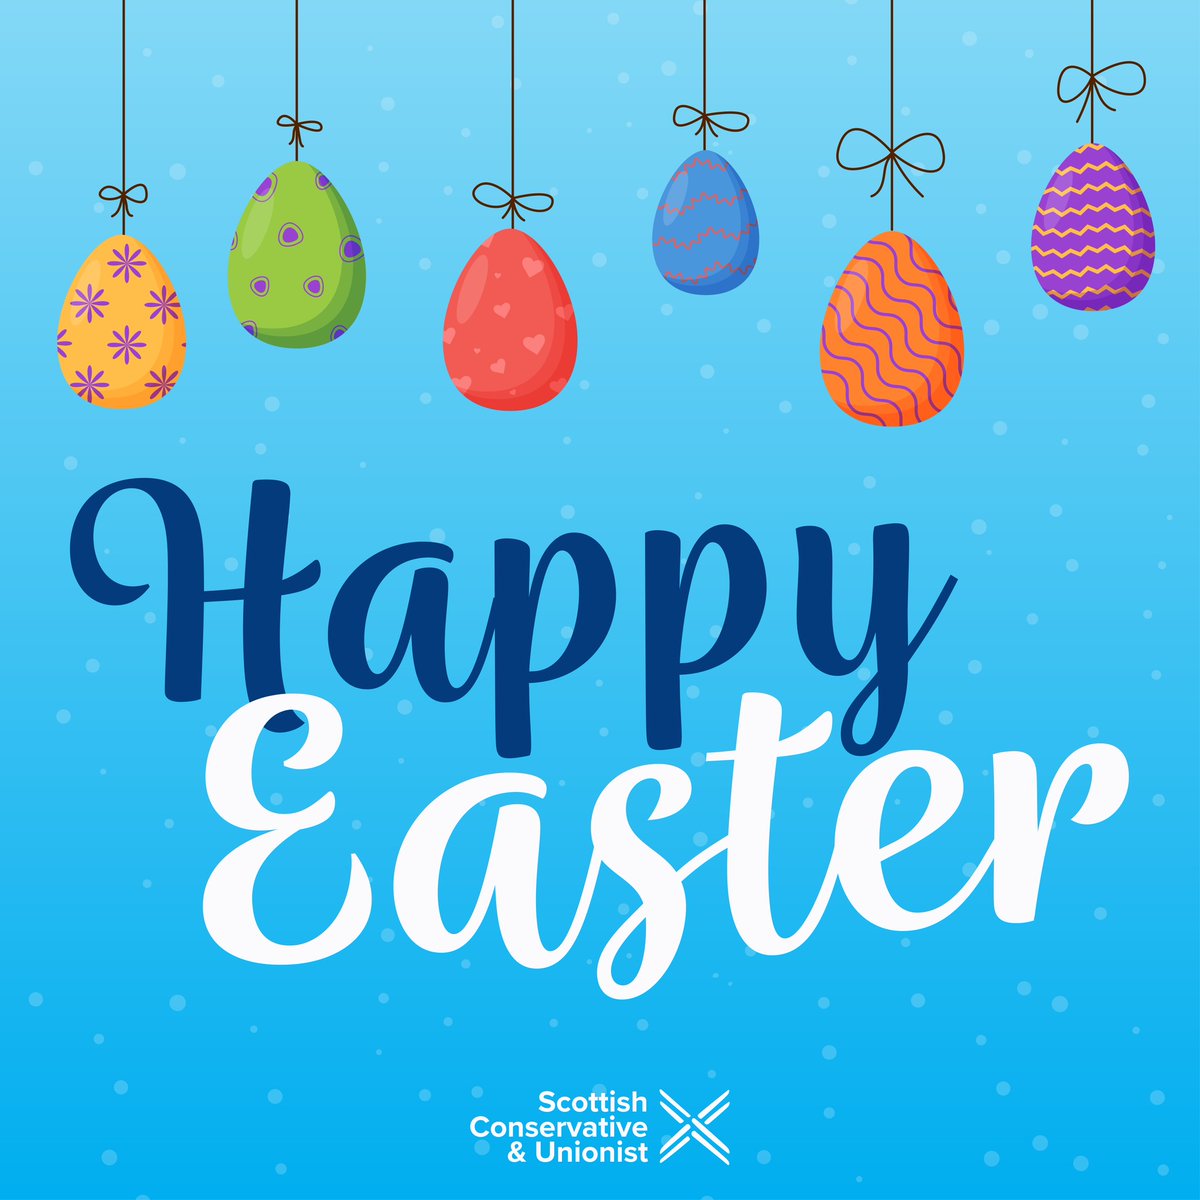 I wish everyone a Happy Easter!